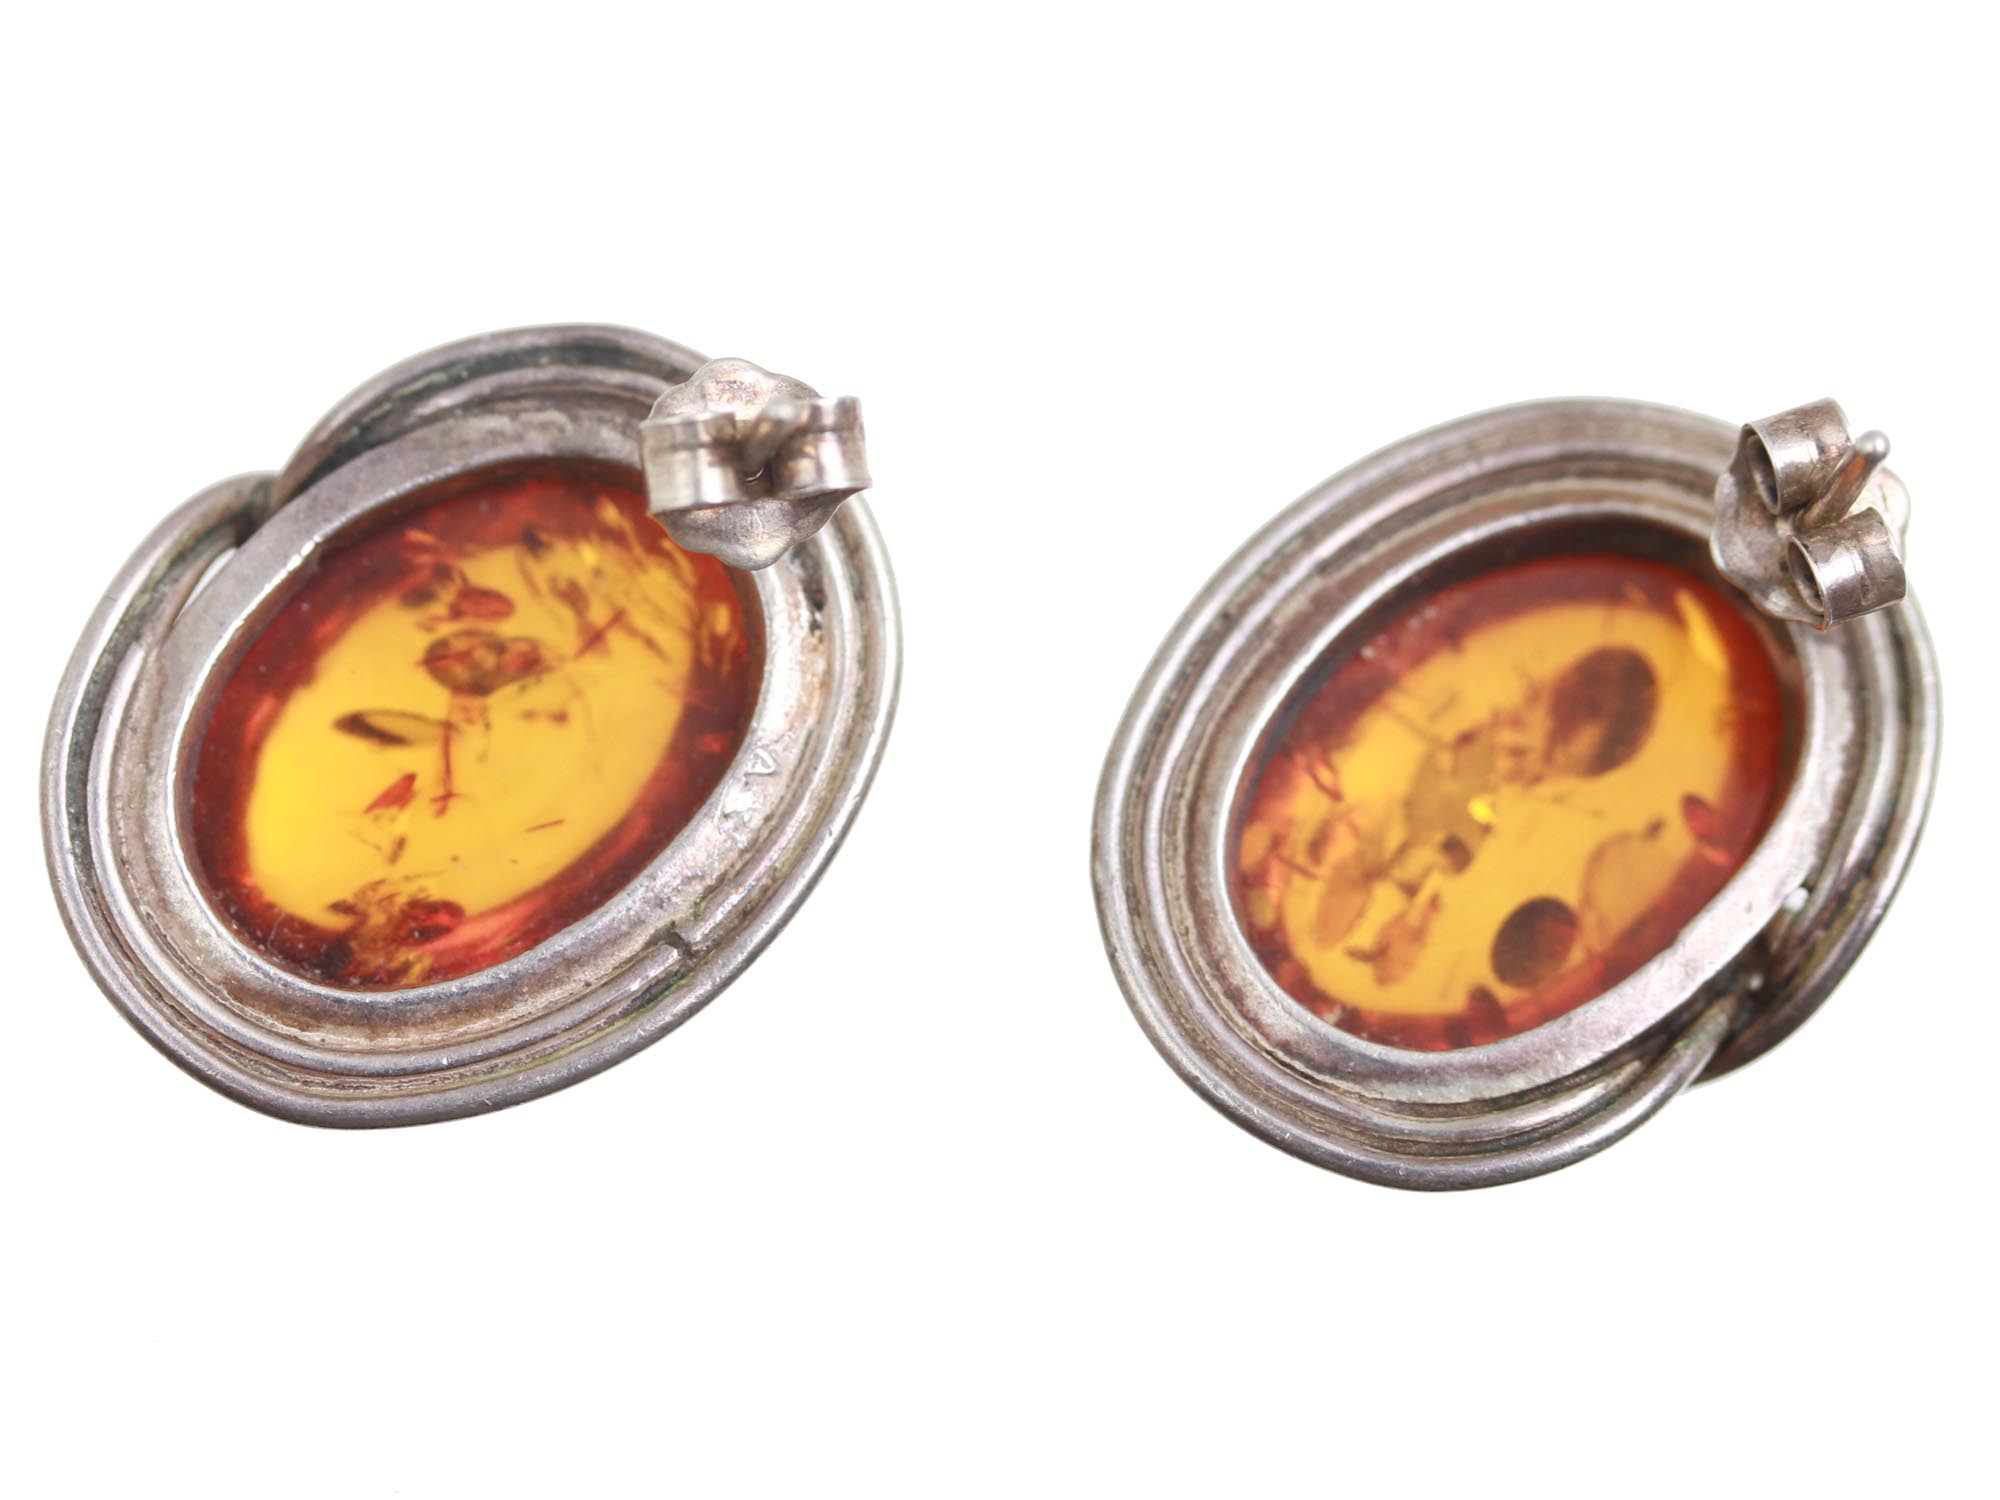 A JEWELRY SET AMBER SILVER EARRINGS AND PENDANT PIC-6